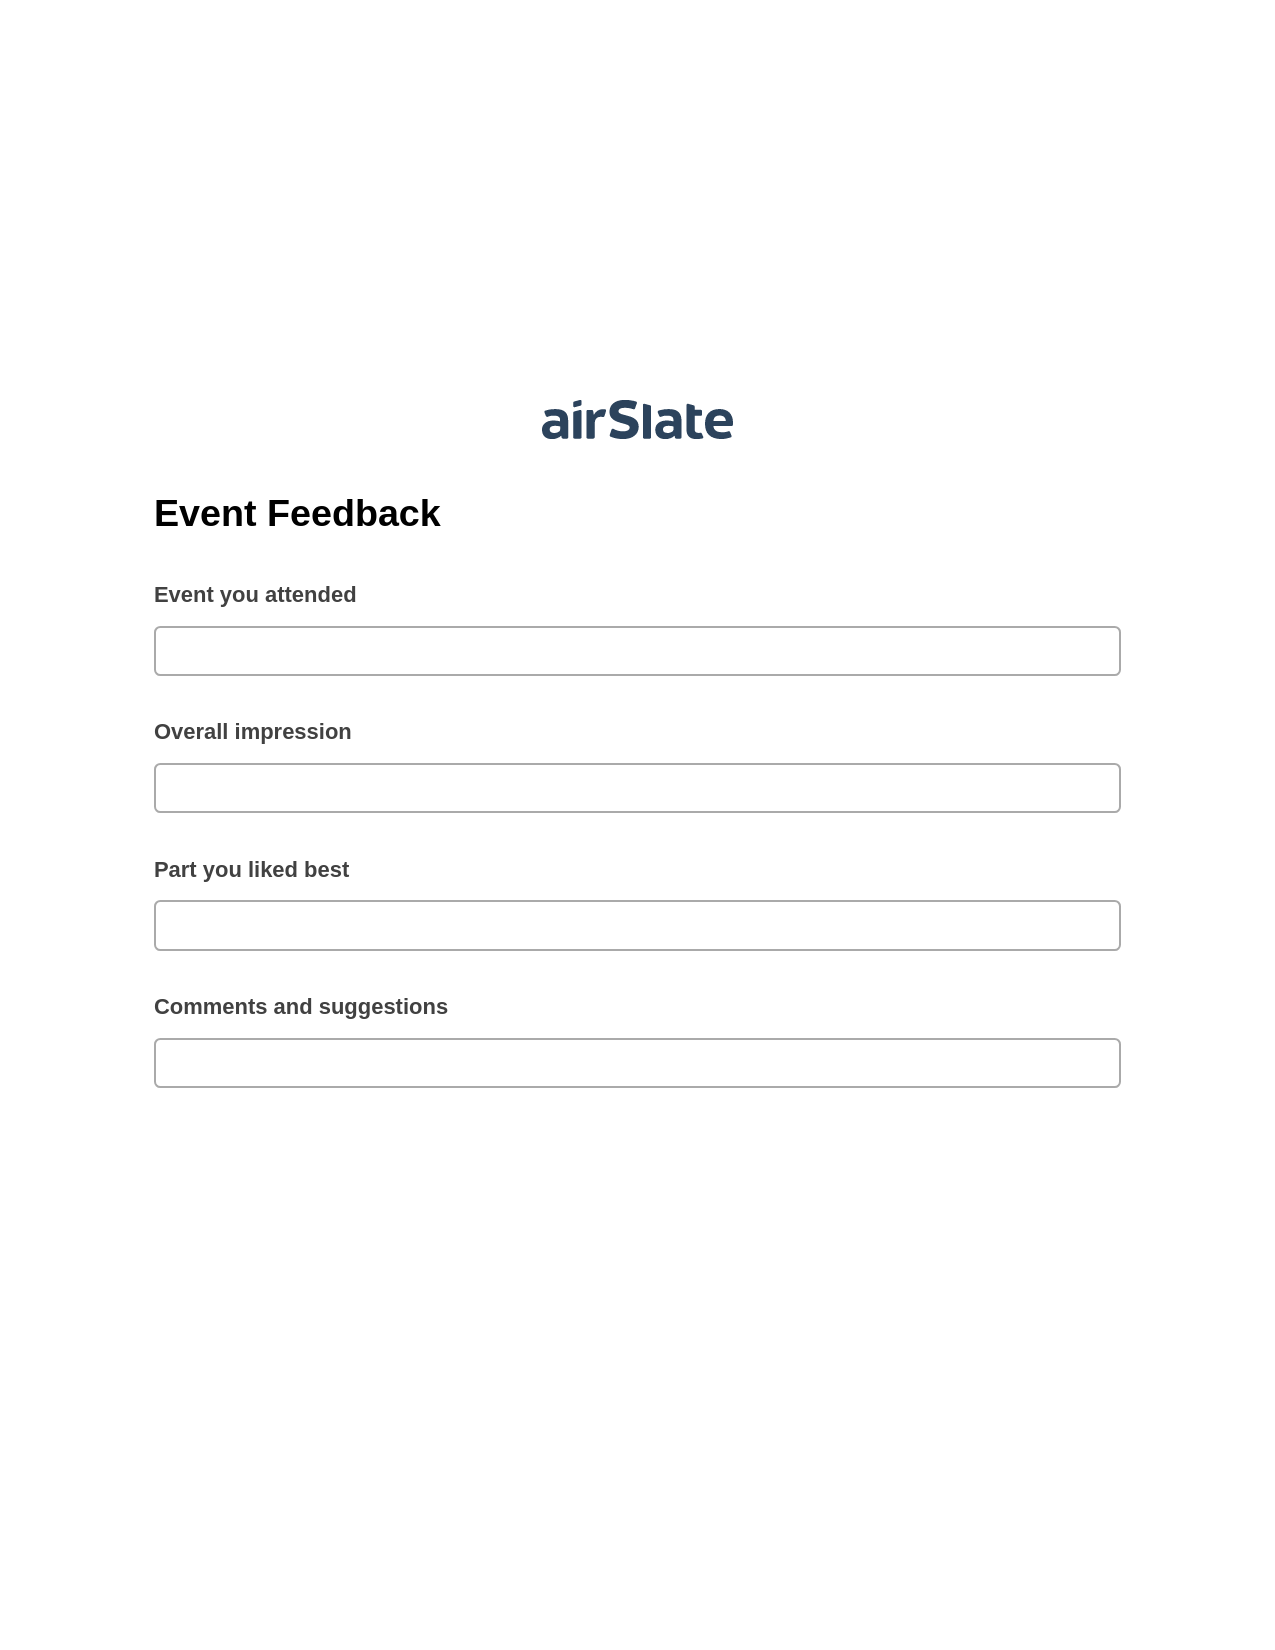 Event Feedback Pre-fill from Salesforce Record Bot, Open as Role Bot, Export to Formstack Documents Bot